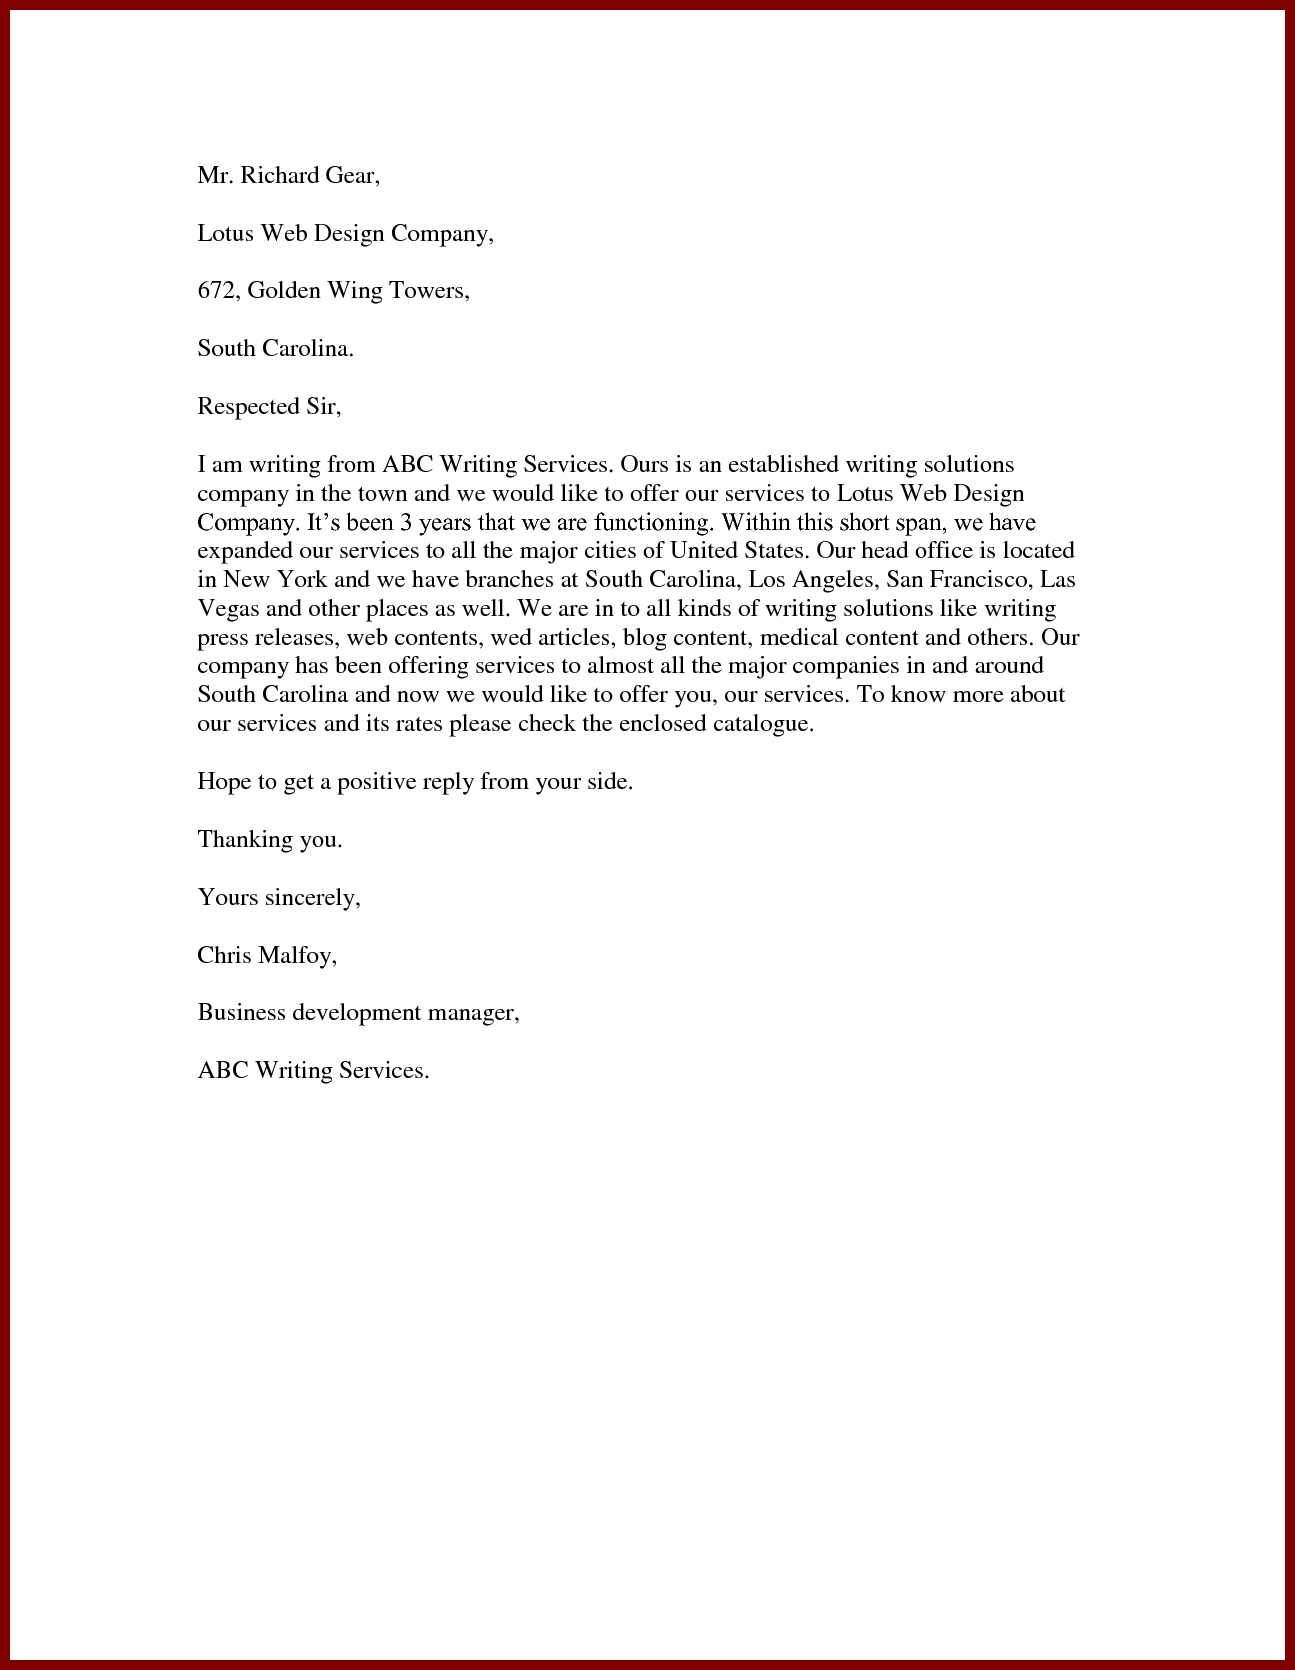 Sample proposal letter for services 15 offer sendletters famous or 